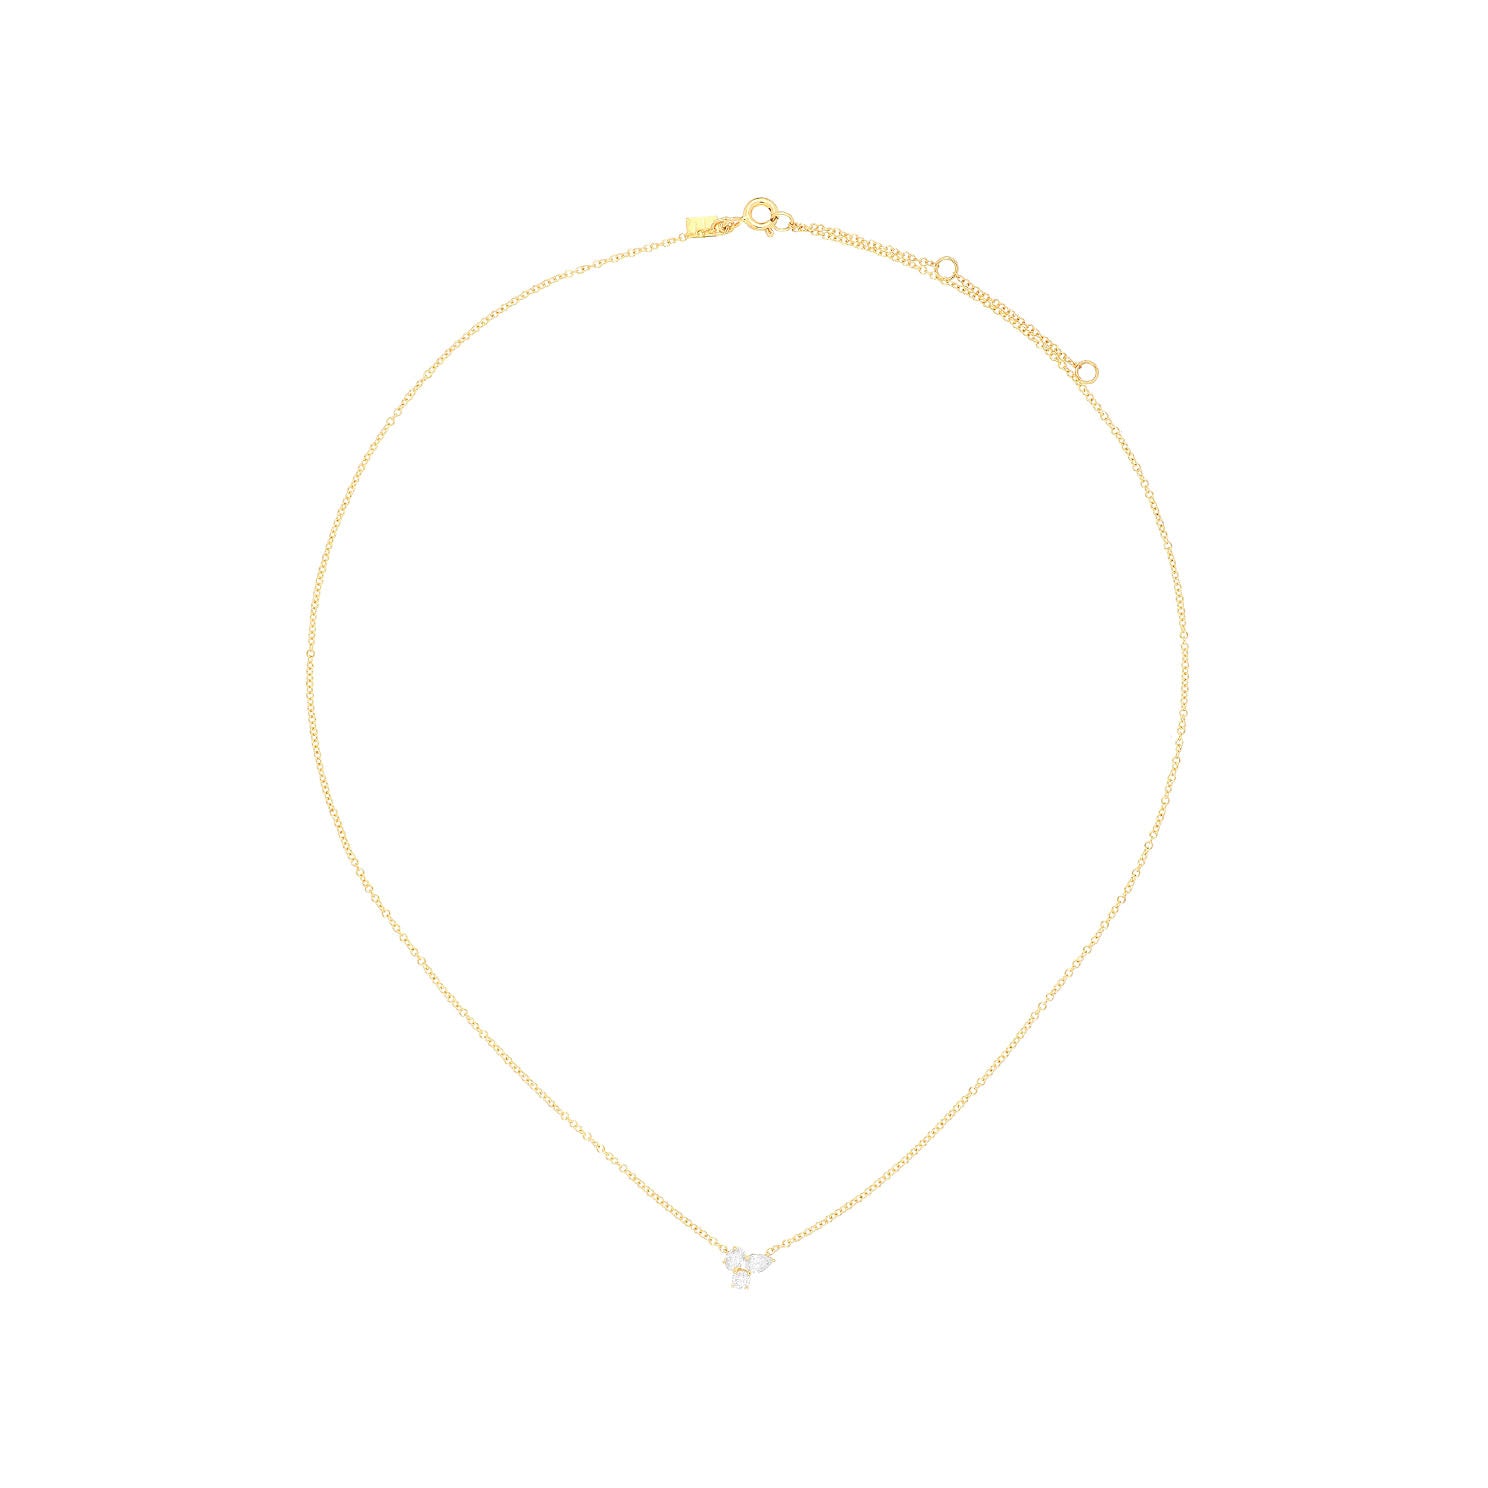 Triple Diamond Cluster Necklace in 14k yellow gold